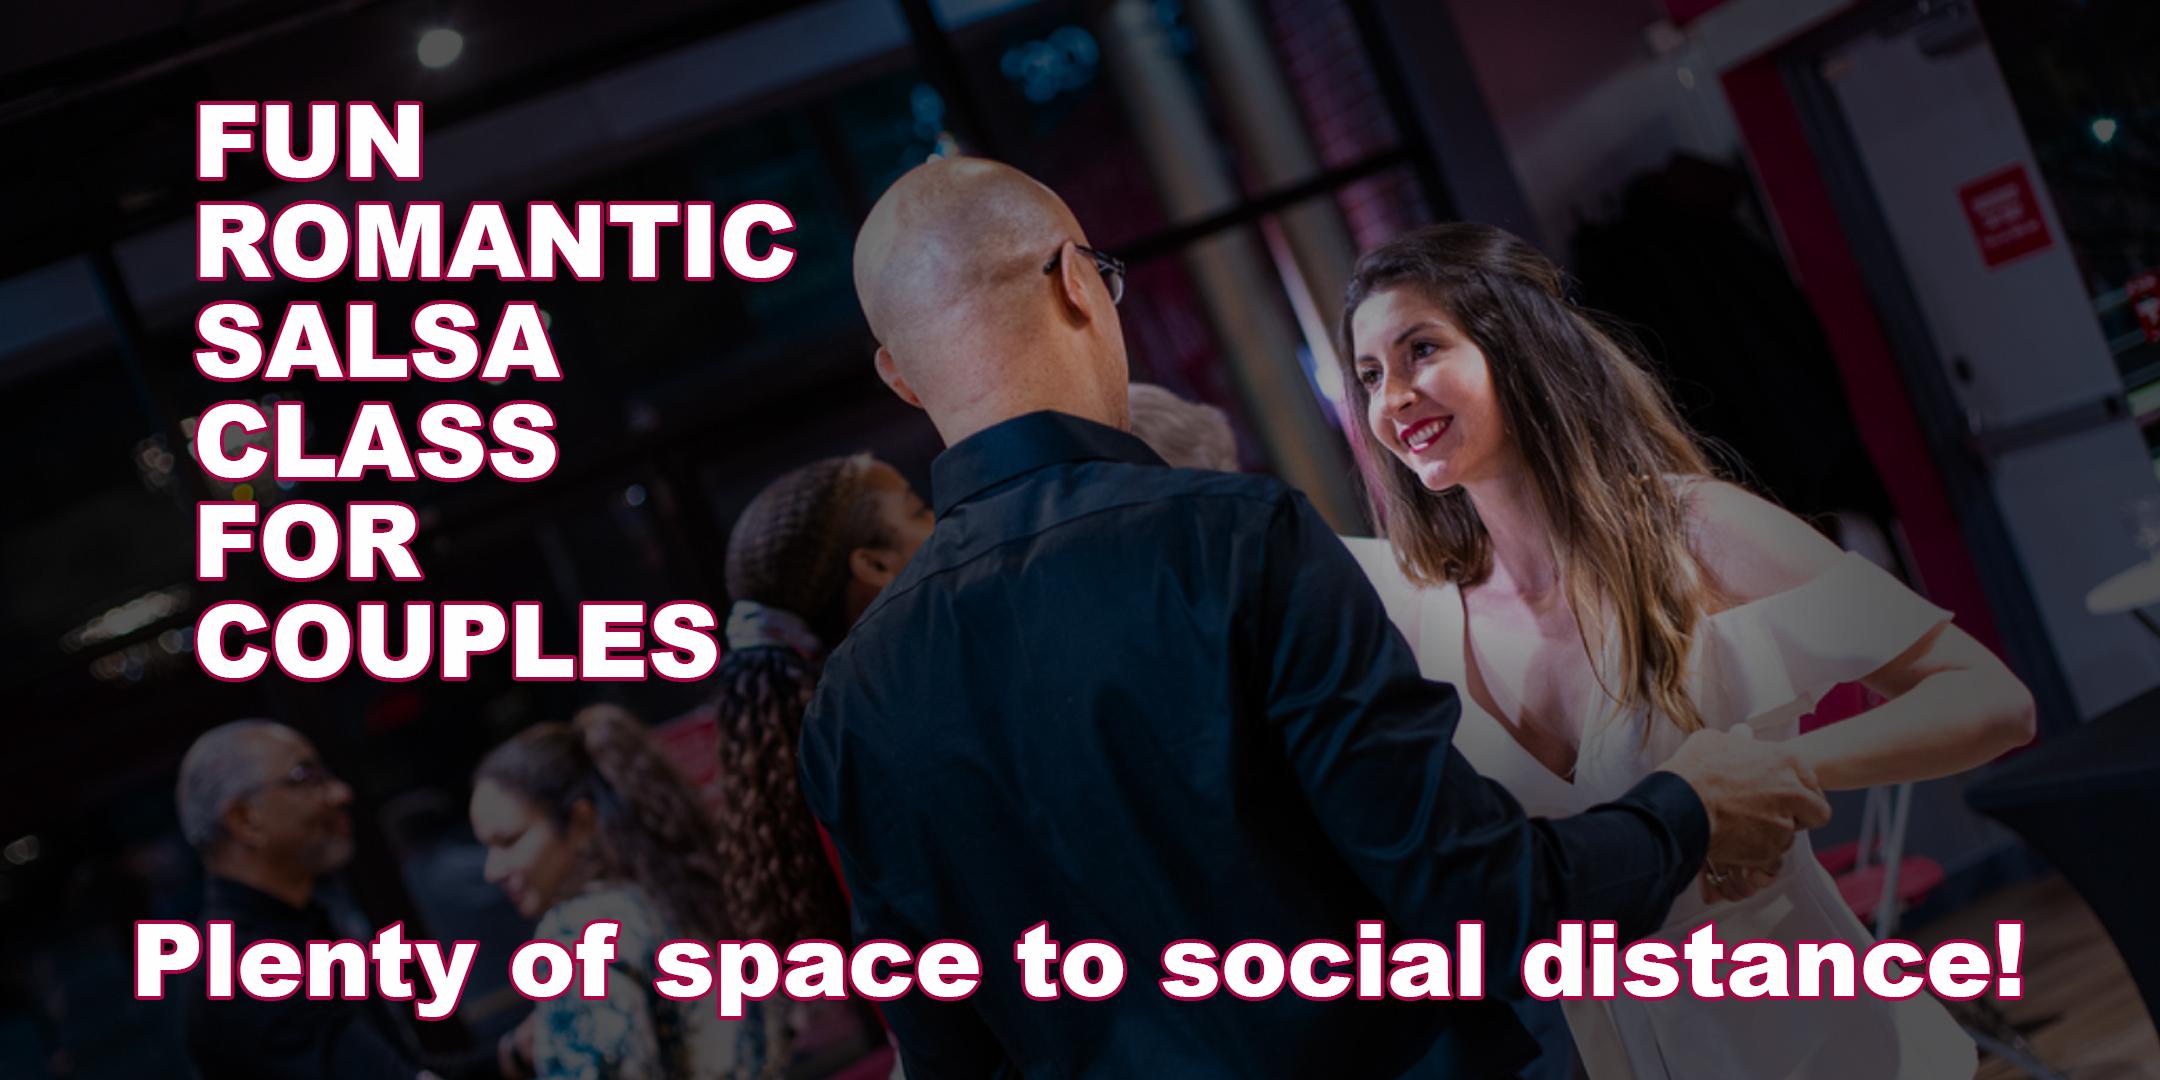 Fun & Romantic Salsa Class For Couples With Plenty Of Room To Distance